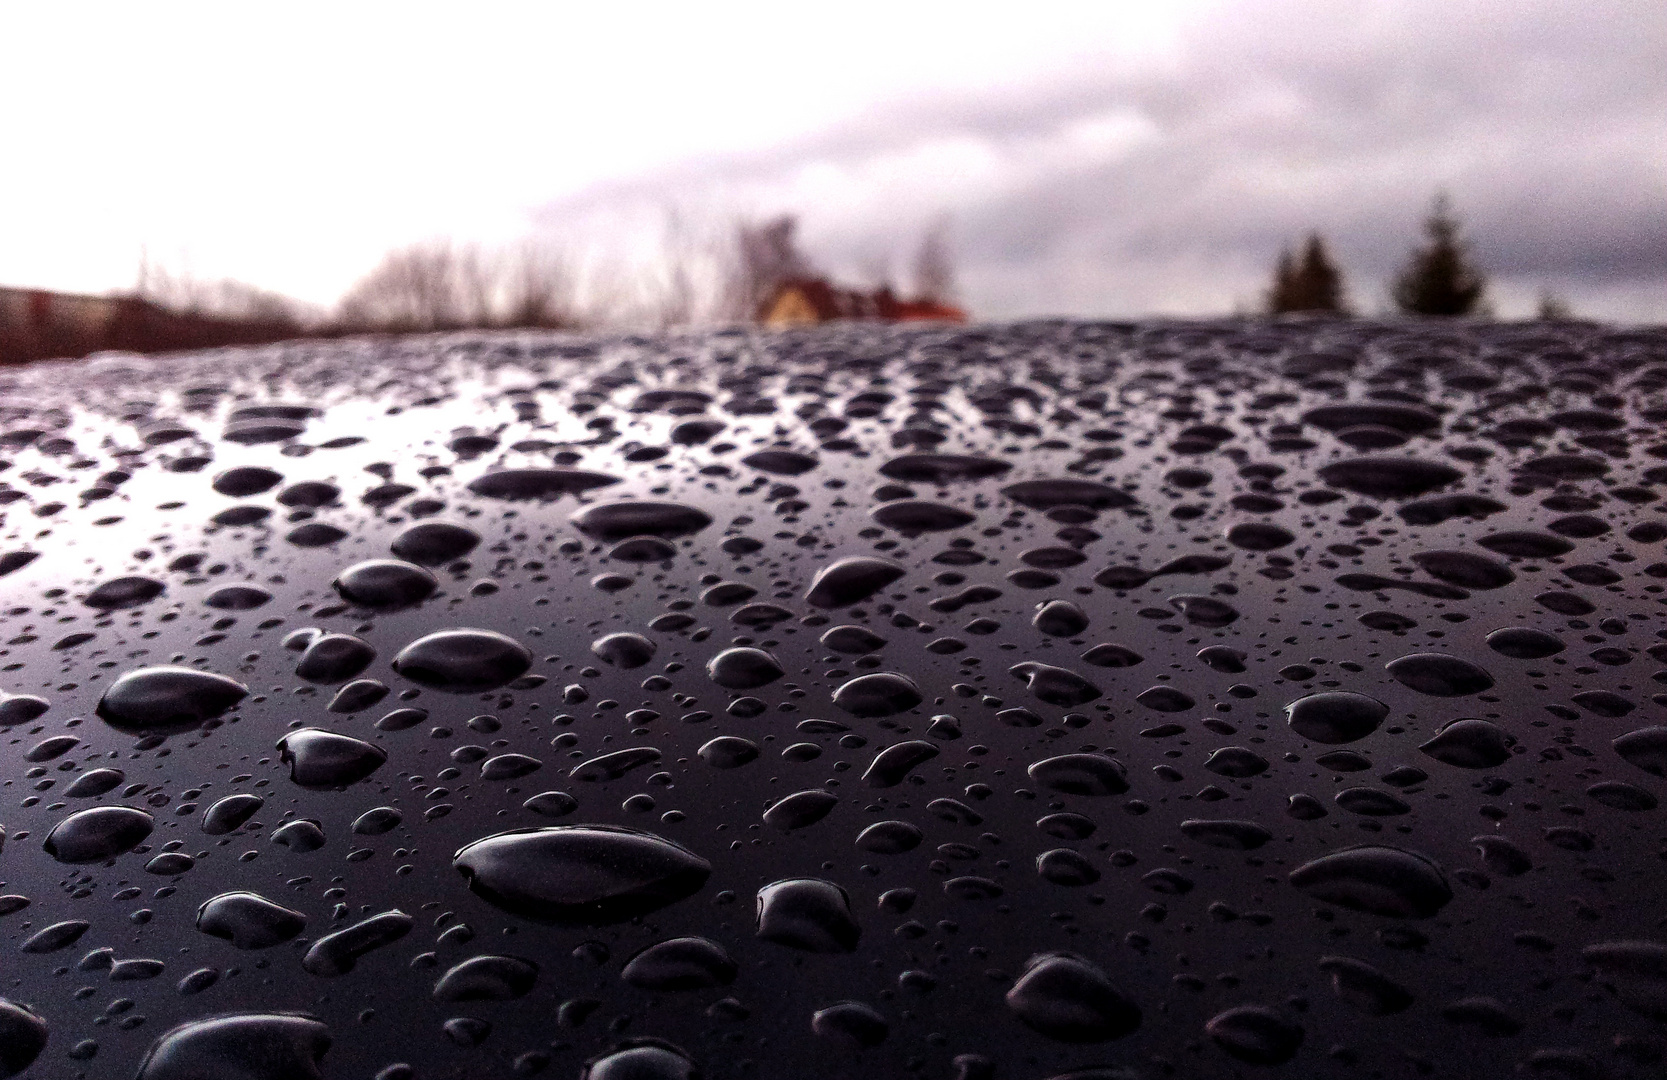 raindrops on my car and go look at the underground, they begin to fly